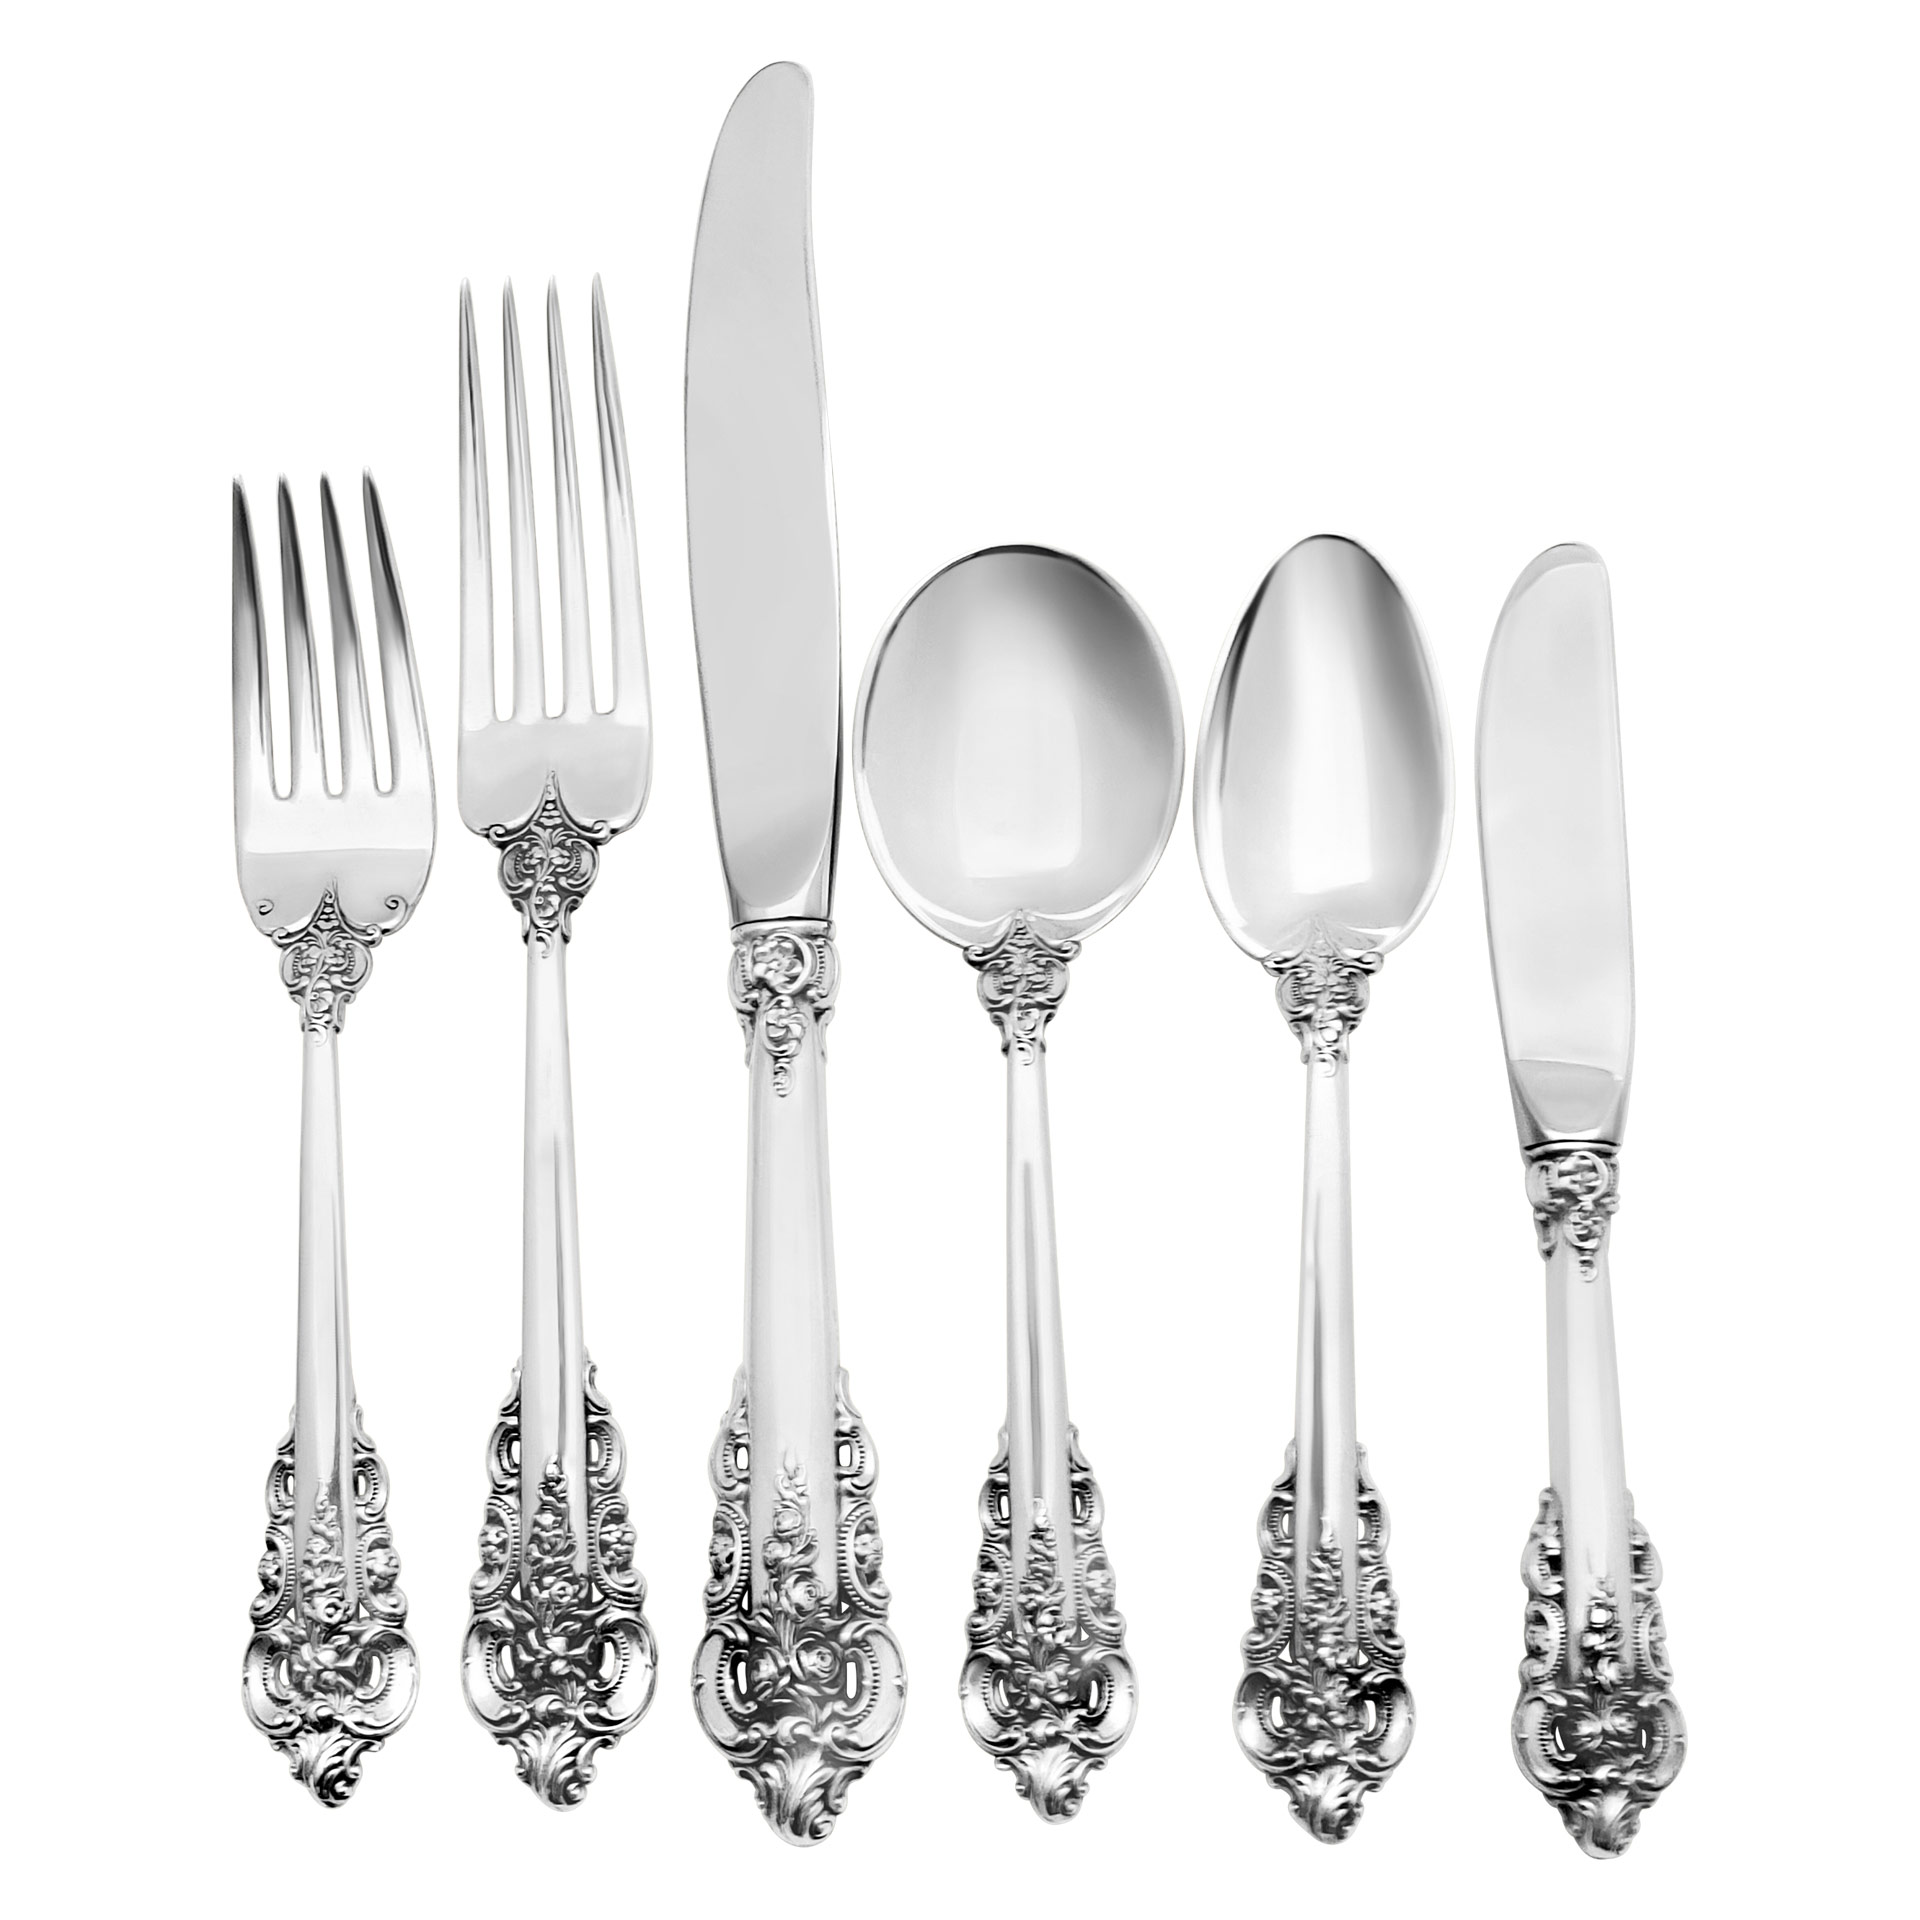 "GRANDE BAROQUE" Sterling Silver Flatware- Patented in 1941 by Wallace. 6 place setting for 10 with 10 serving pieces-- 75 pieces total image 1